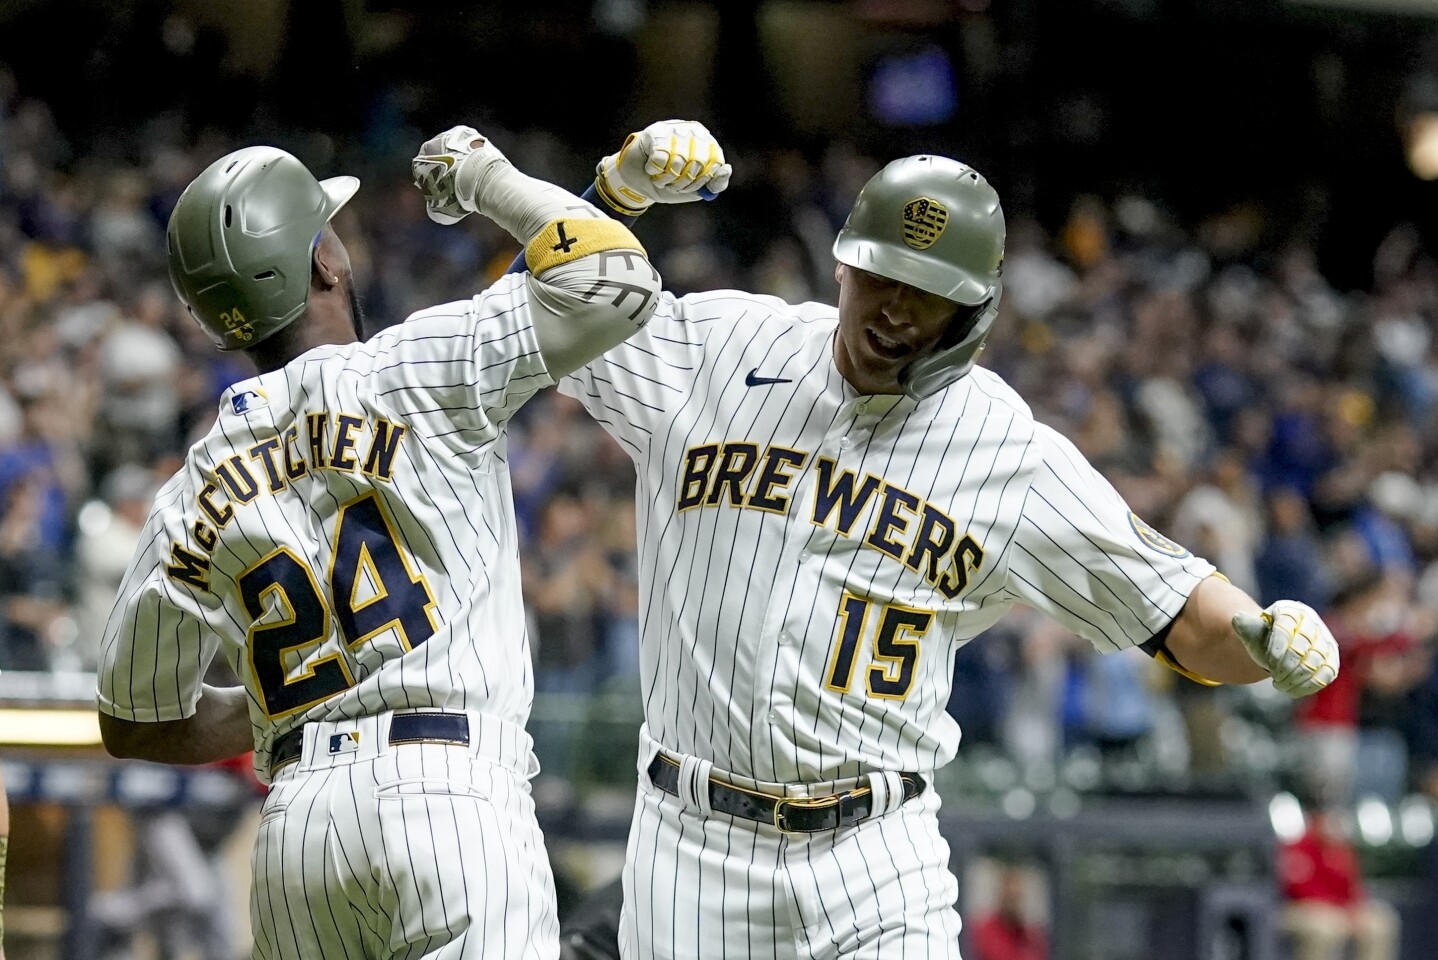 Padres on deck: NL Central-leading Brewers visit Petco - The San Diego Union-Tribune